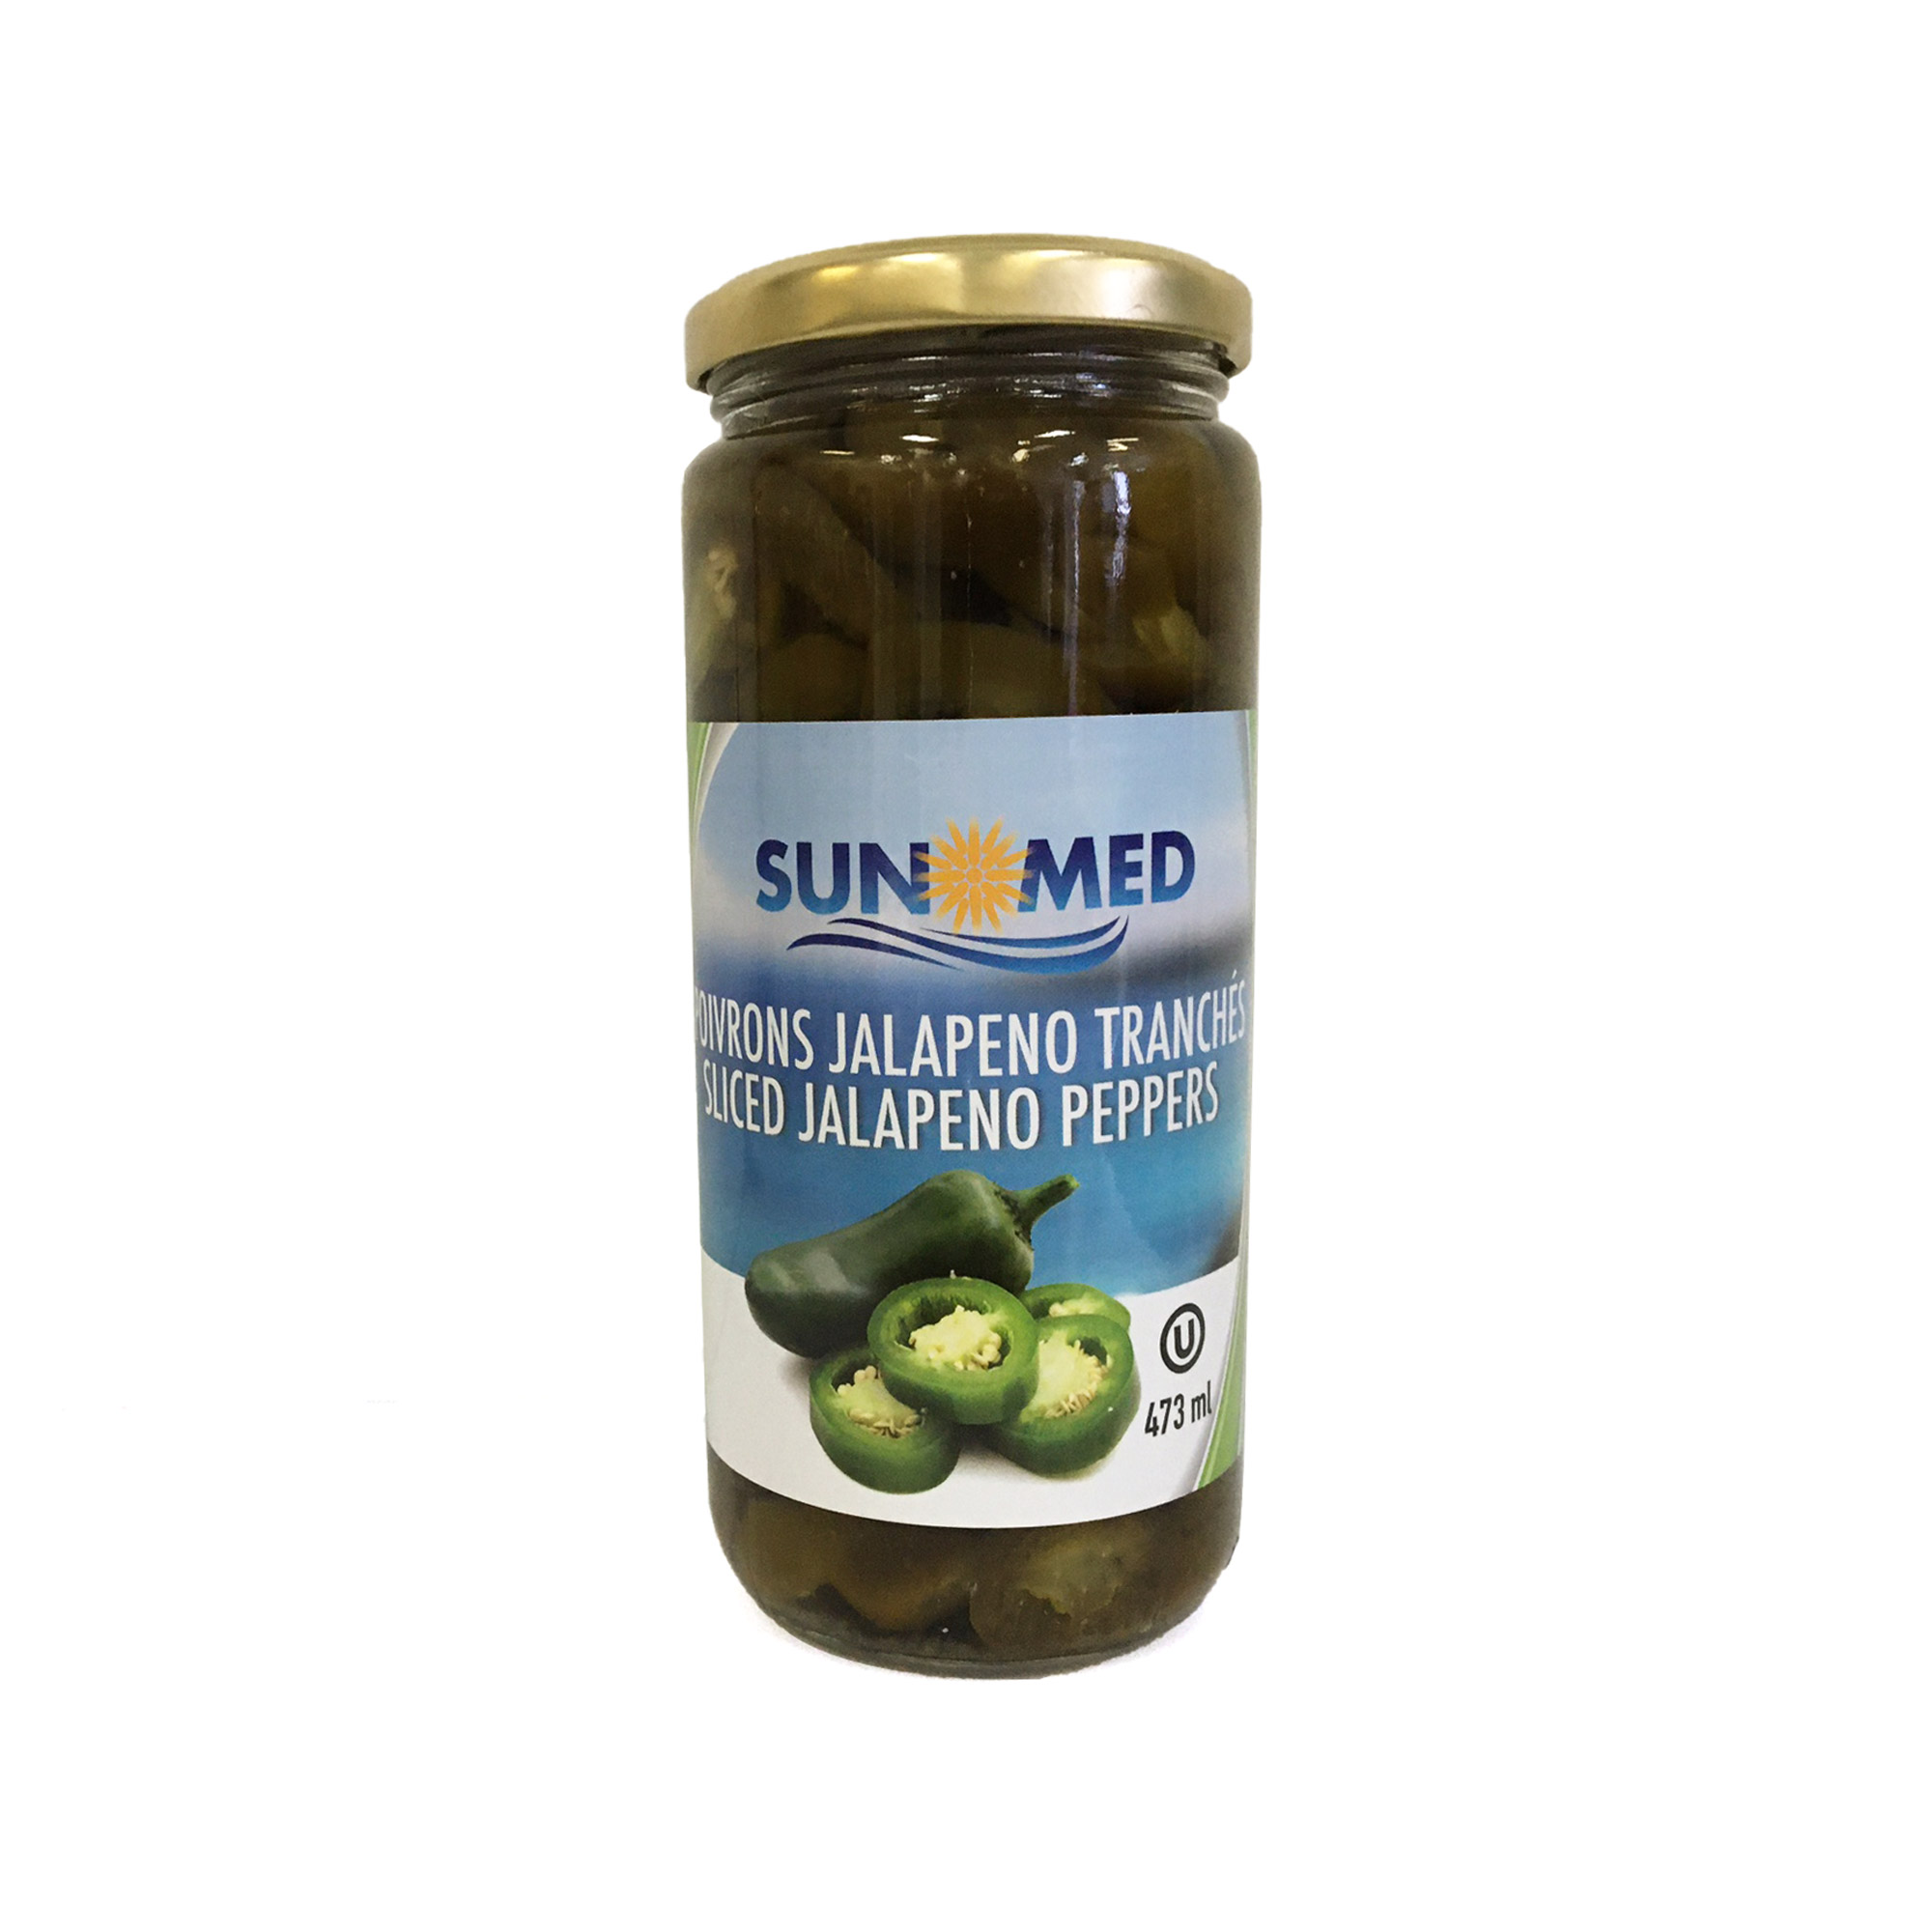 Sliced Jalapeno peppers in glass jars – 473ml